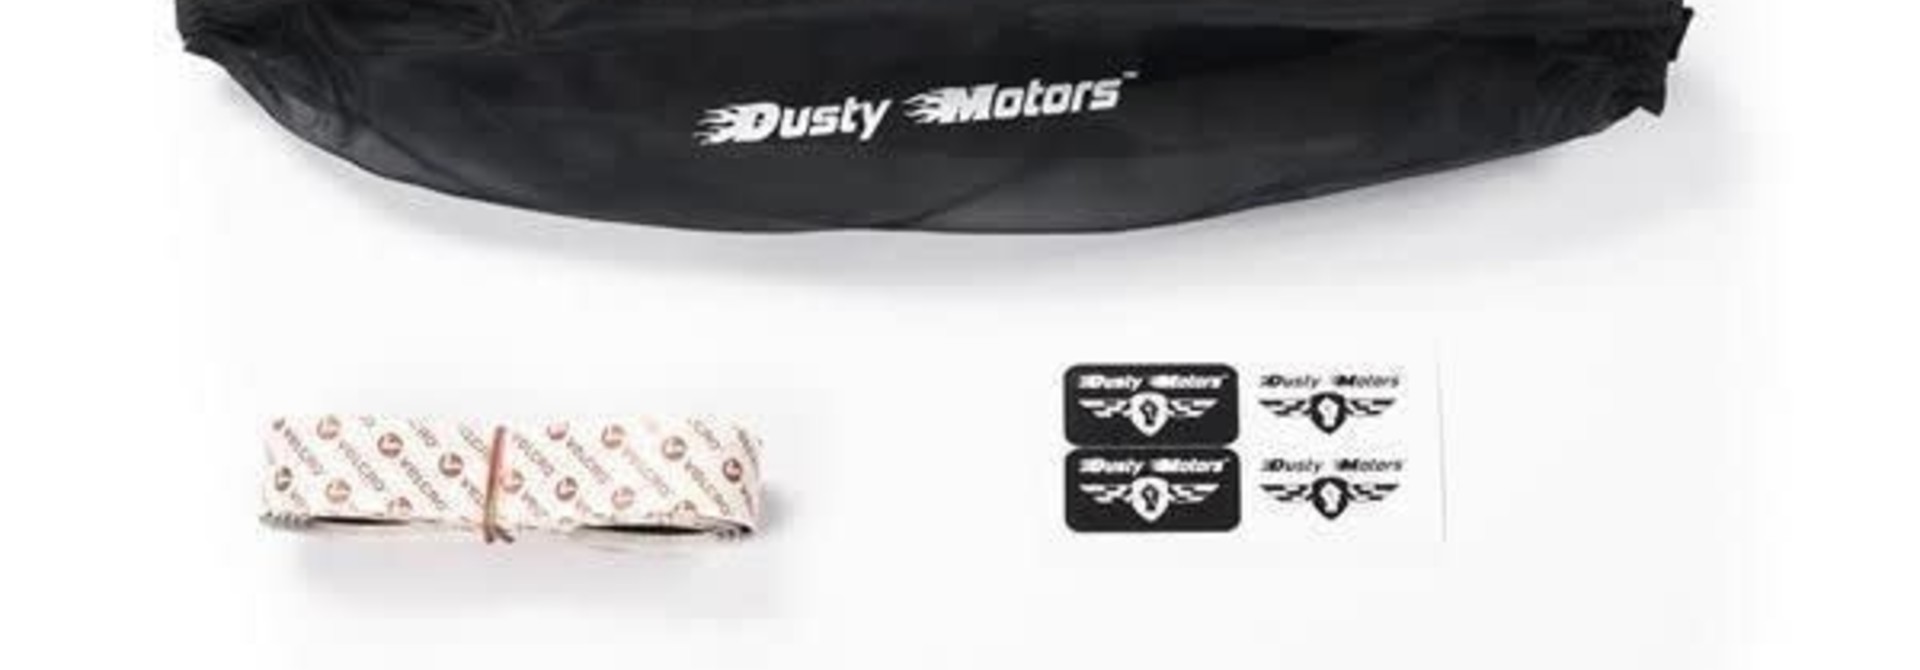 Dusty Motors Protection Cover for Traxxas Wide Maxx Black